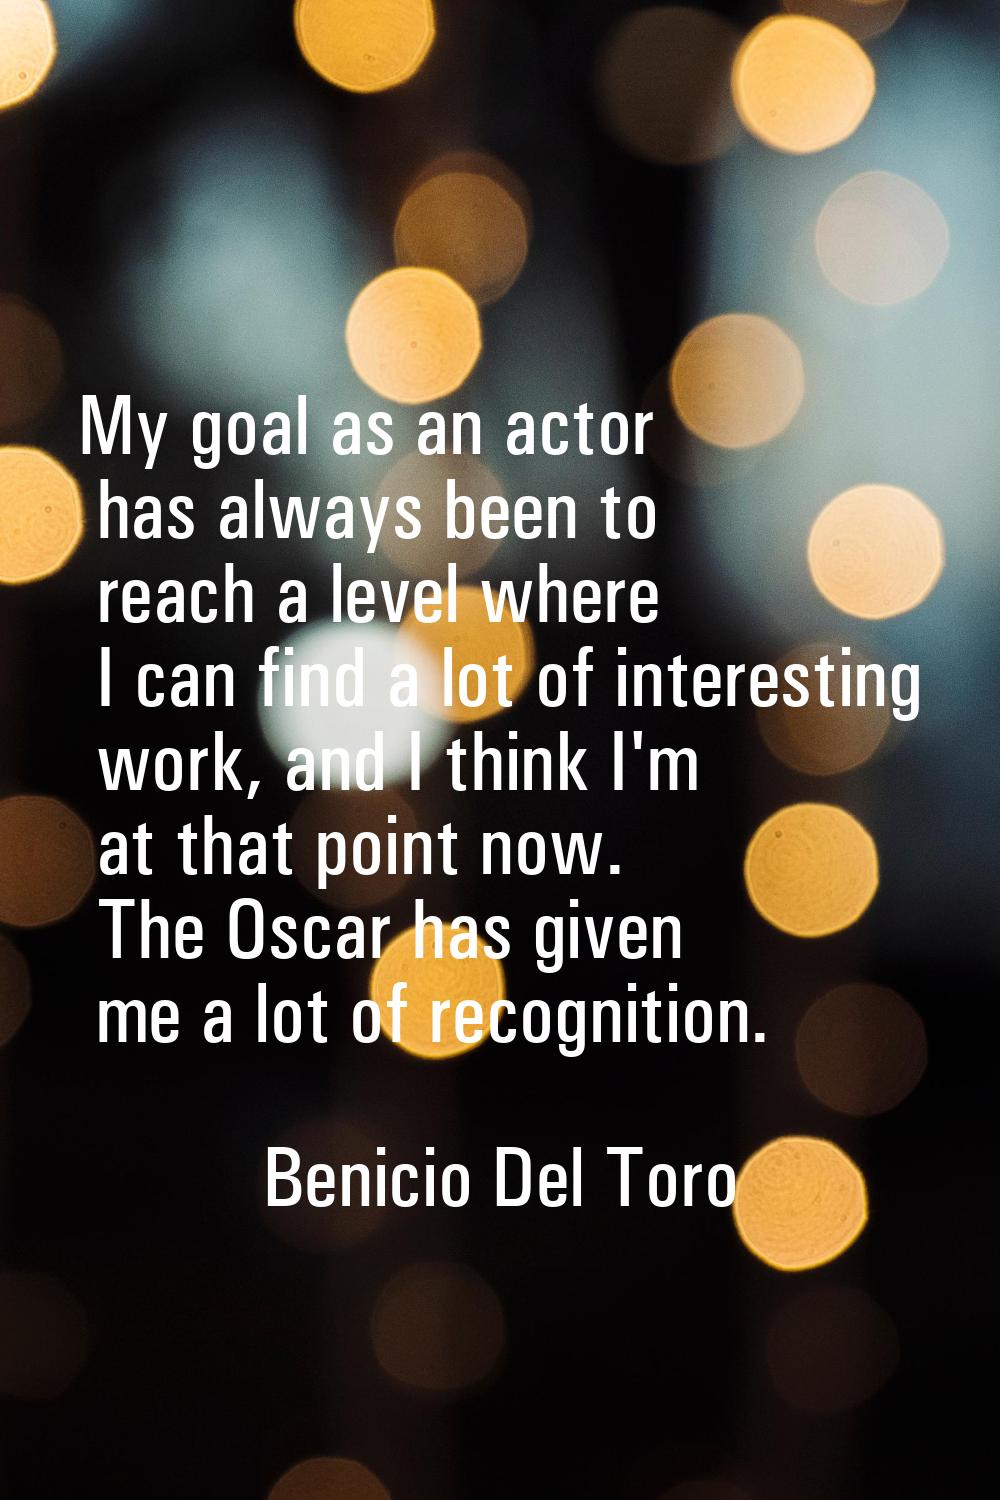 My goal as an actor has always been to reach a level where I can find a lot of interesting work, an